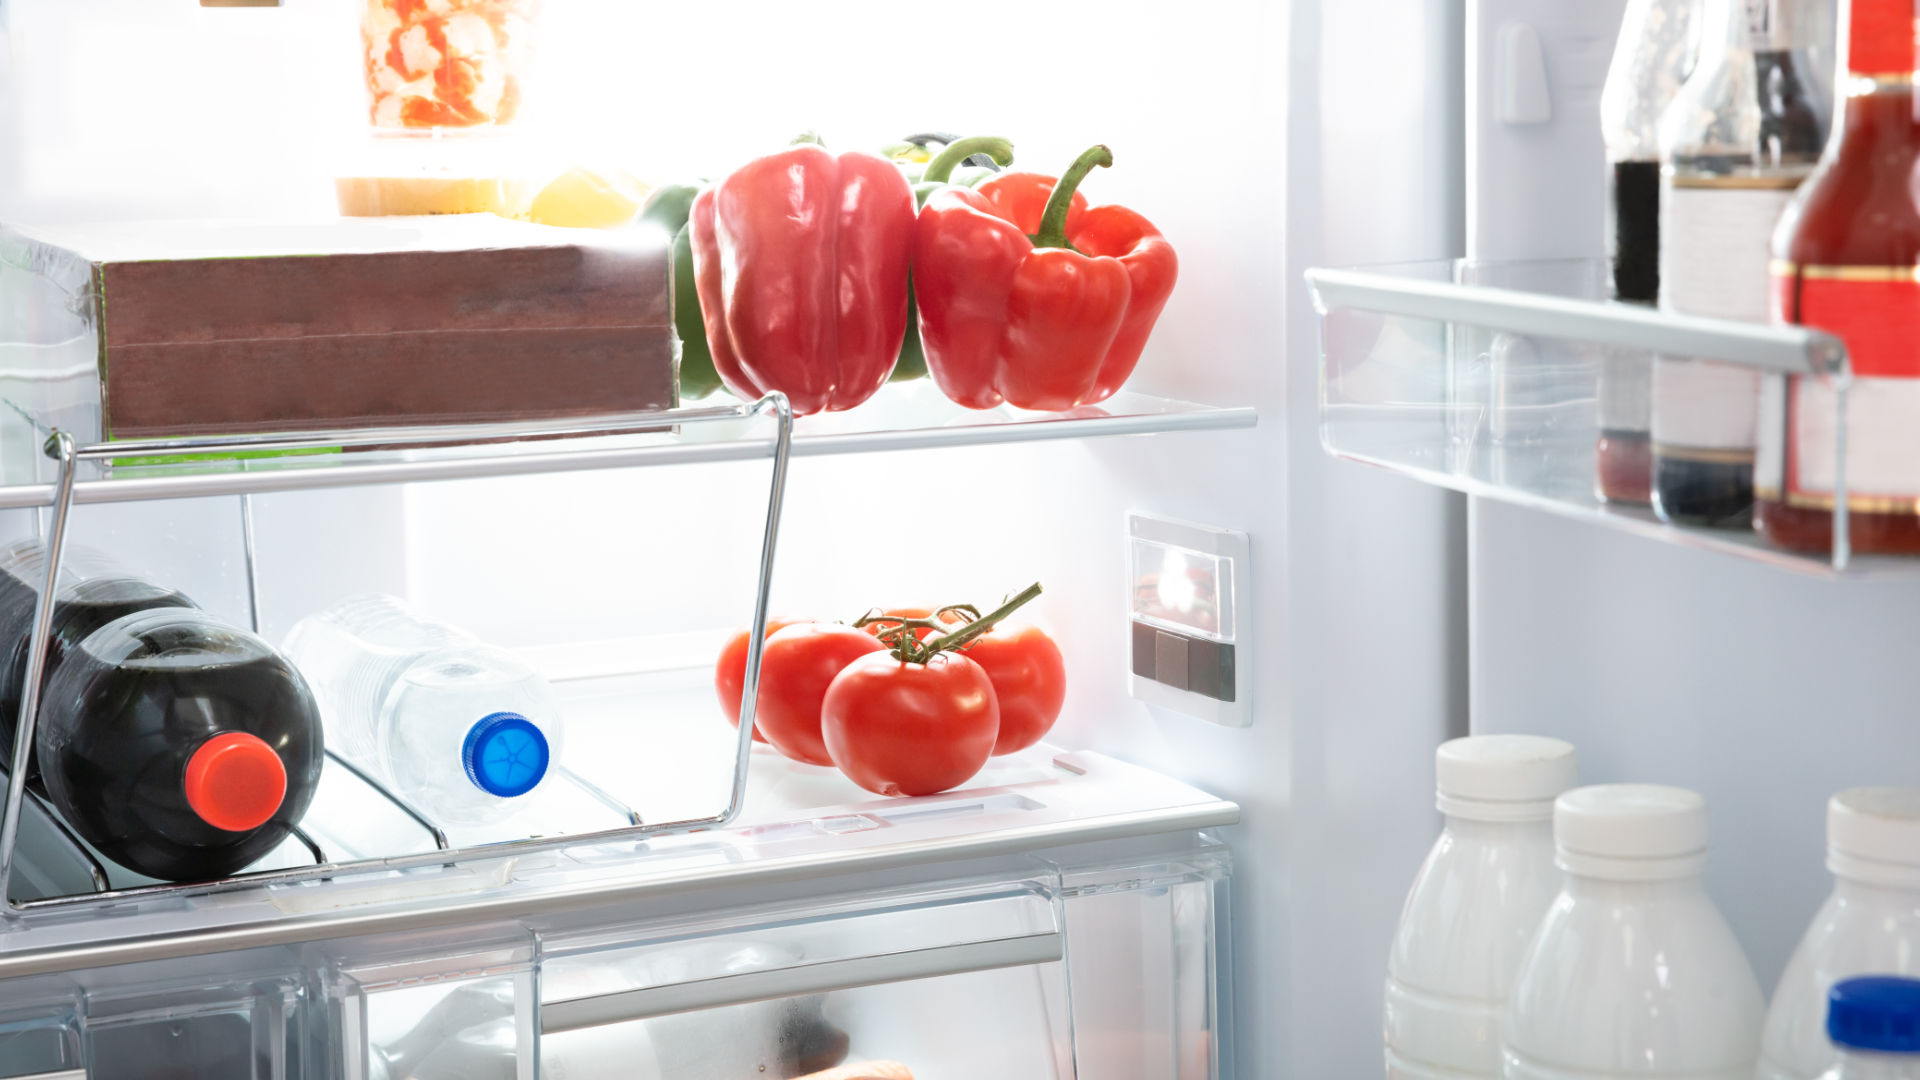 Featured image for “Refrigerator Won’t Shut Off? Here’s What to Do”